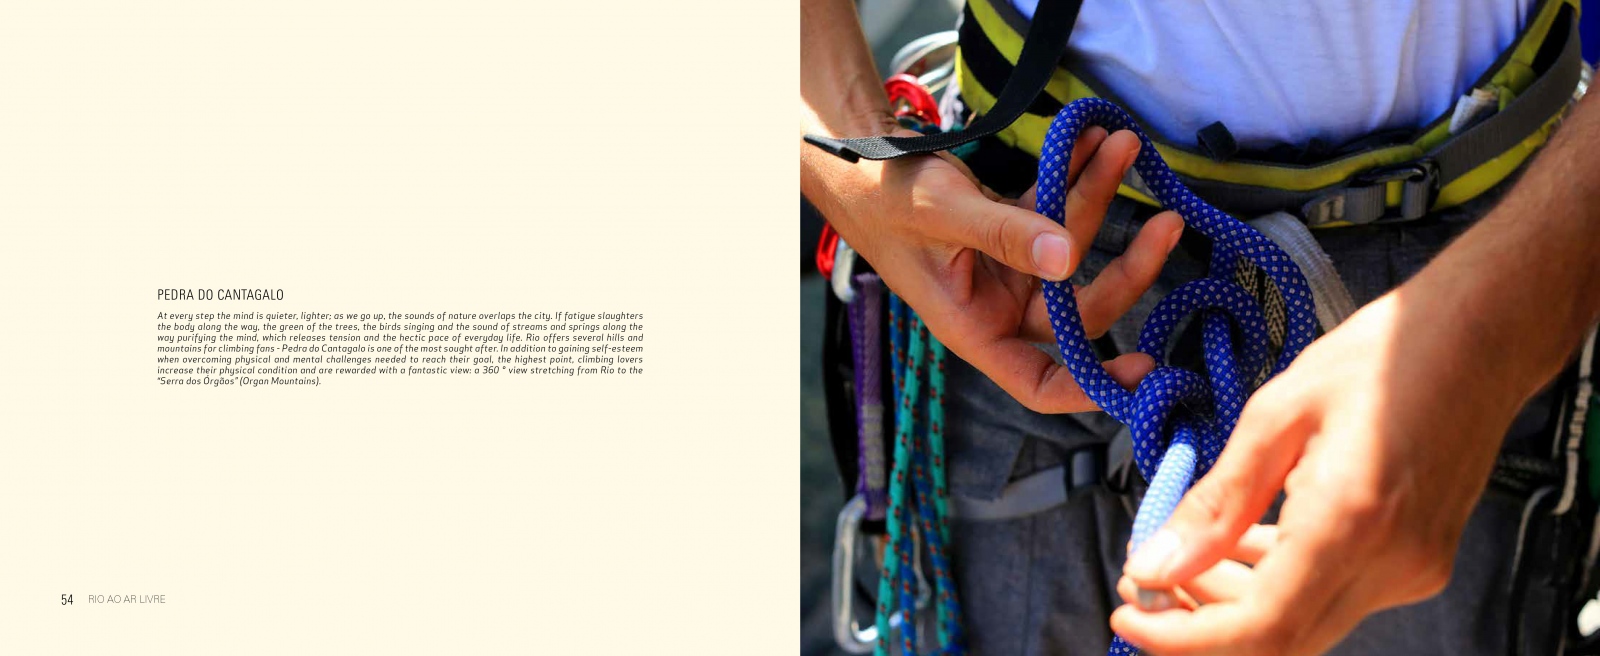 Image from Tearsheets - Rio ao Ar Livre - Book